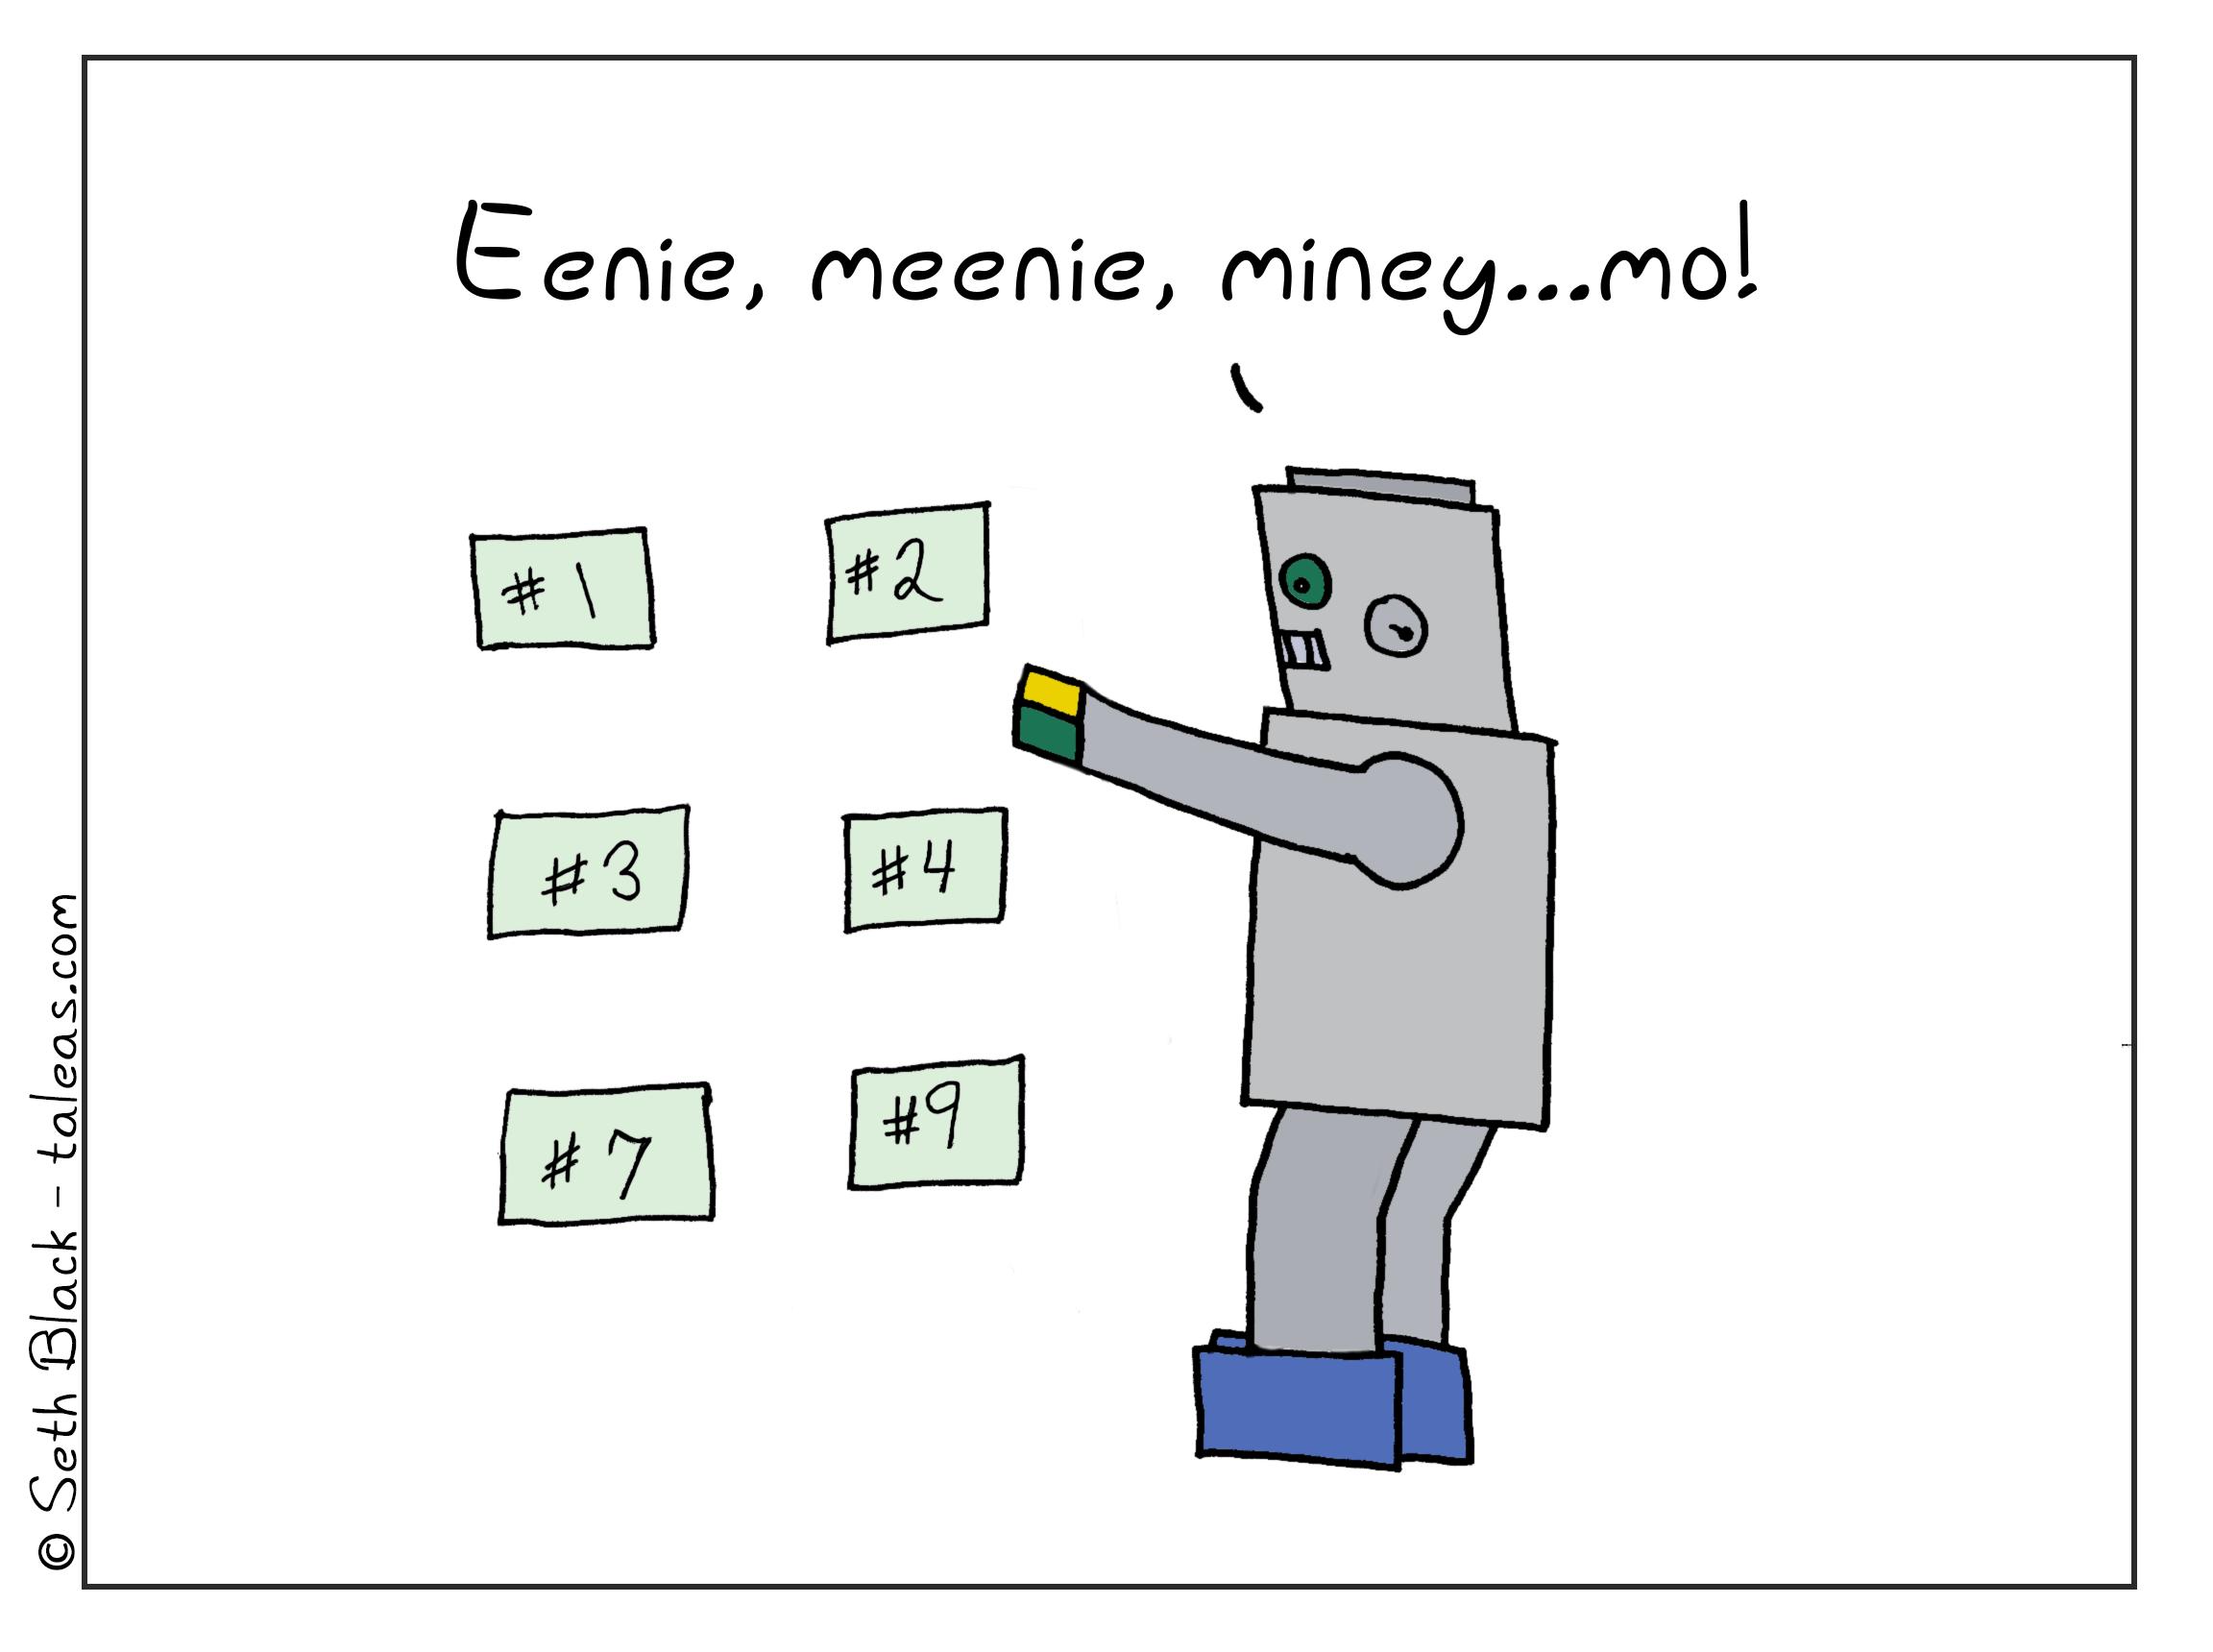 AI Bot looking at the numbers 1, 2 ,3, 4, 7 and 9 and is nervously trying to pick one saying, "Eenie, meenie, miney...mo!"